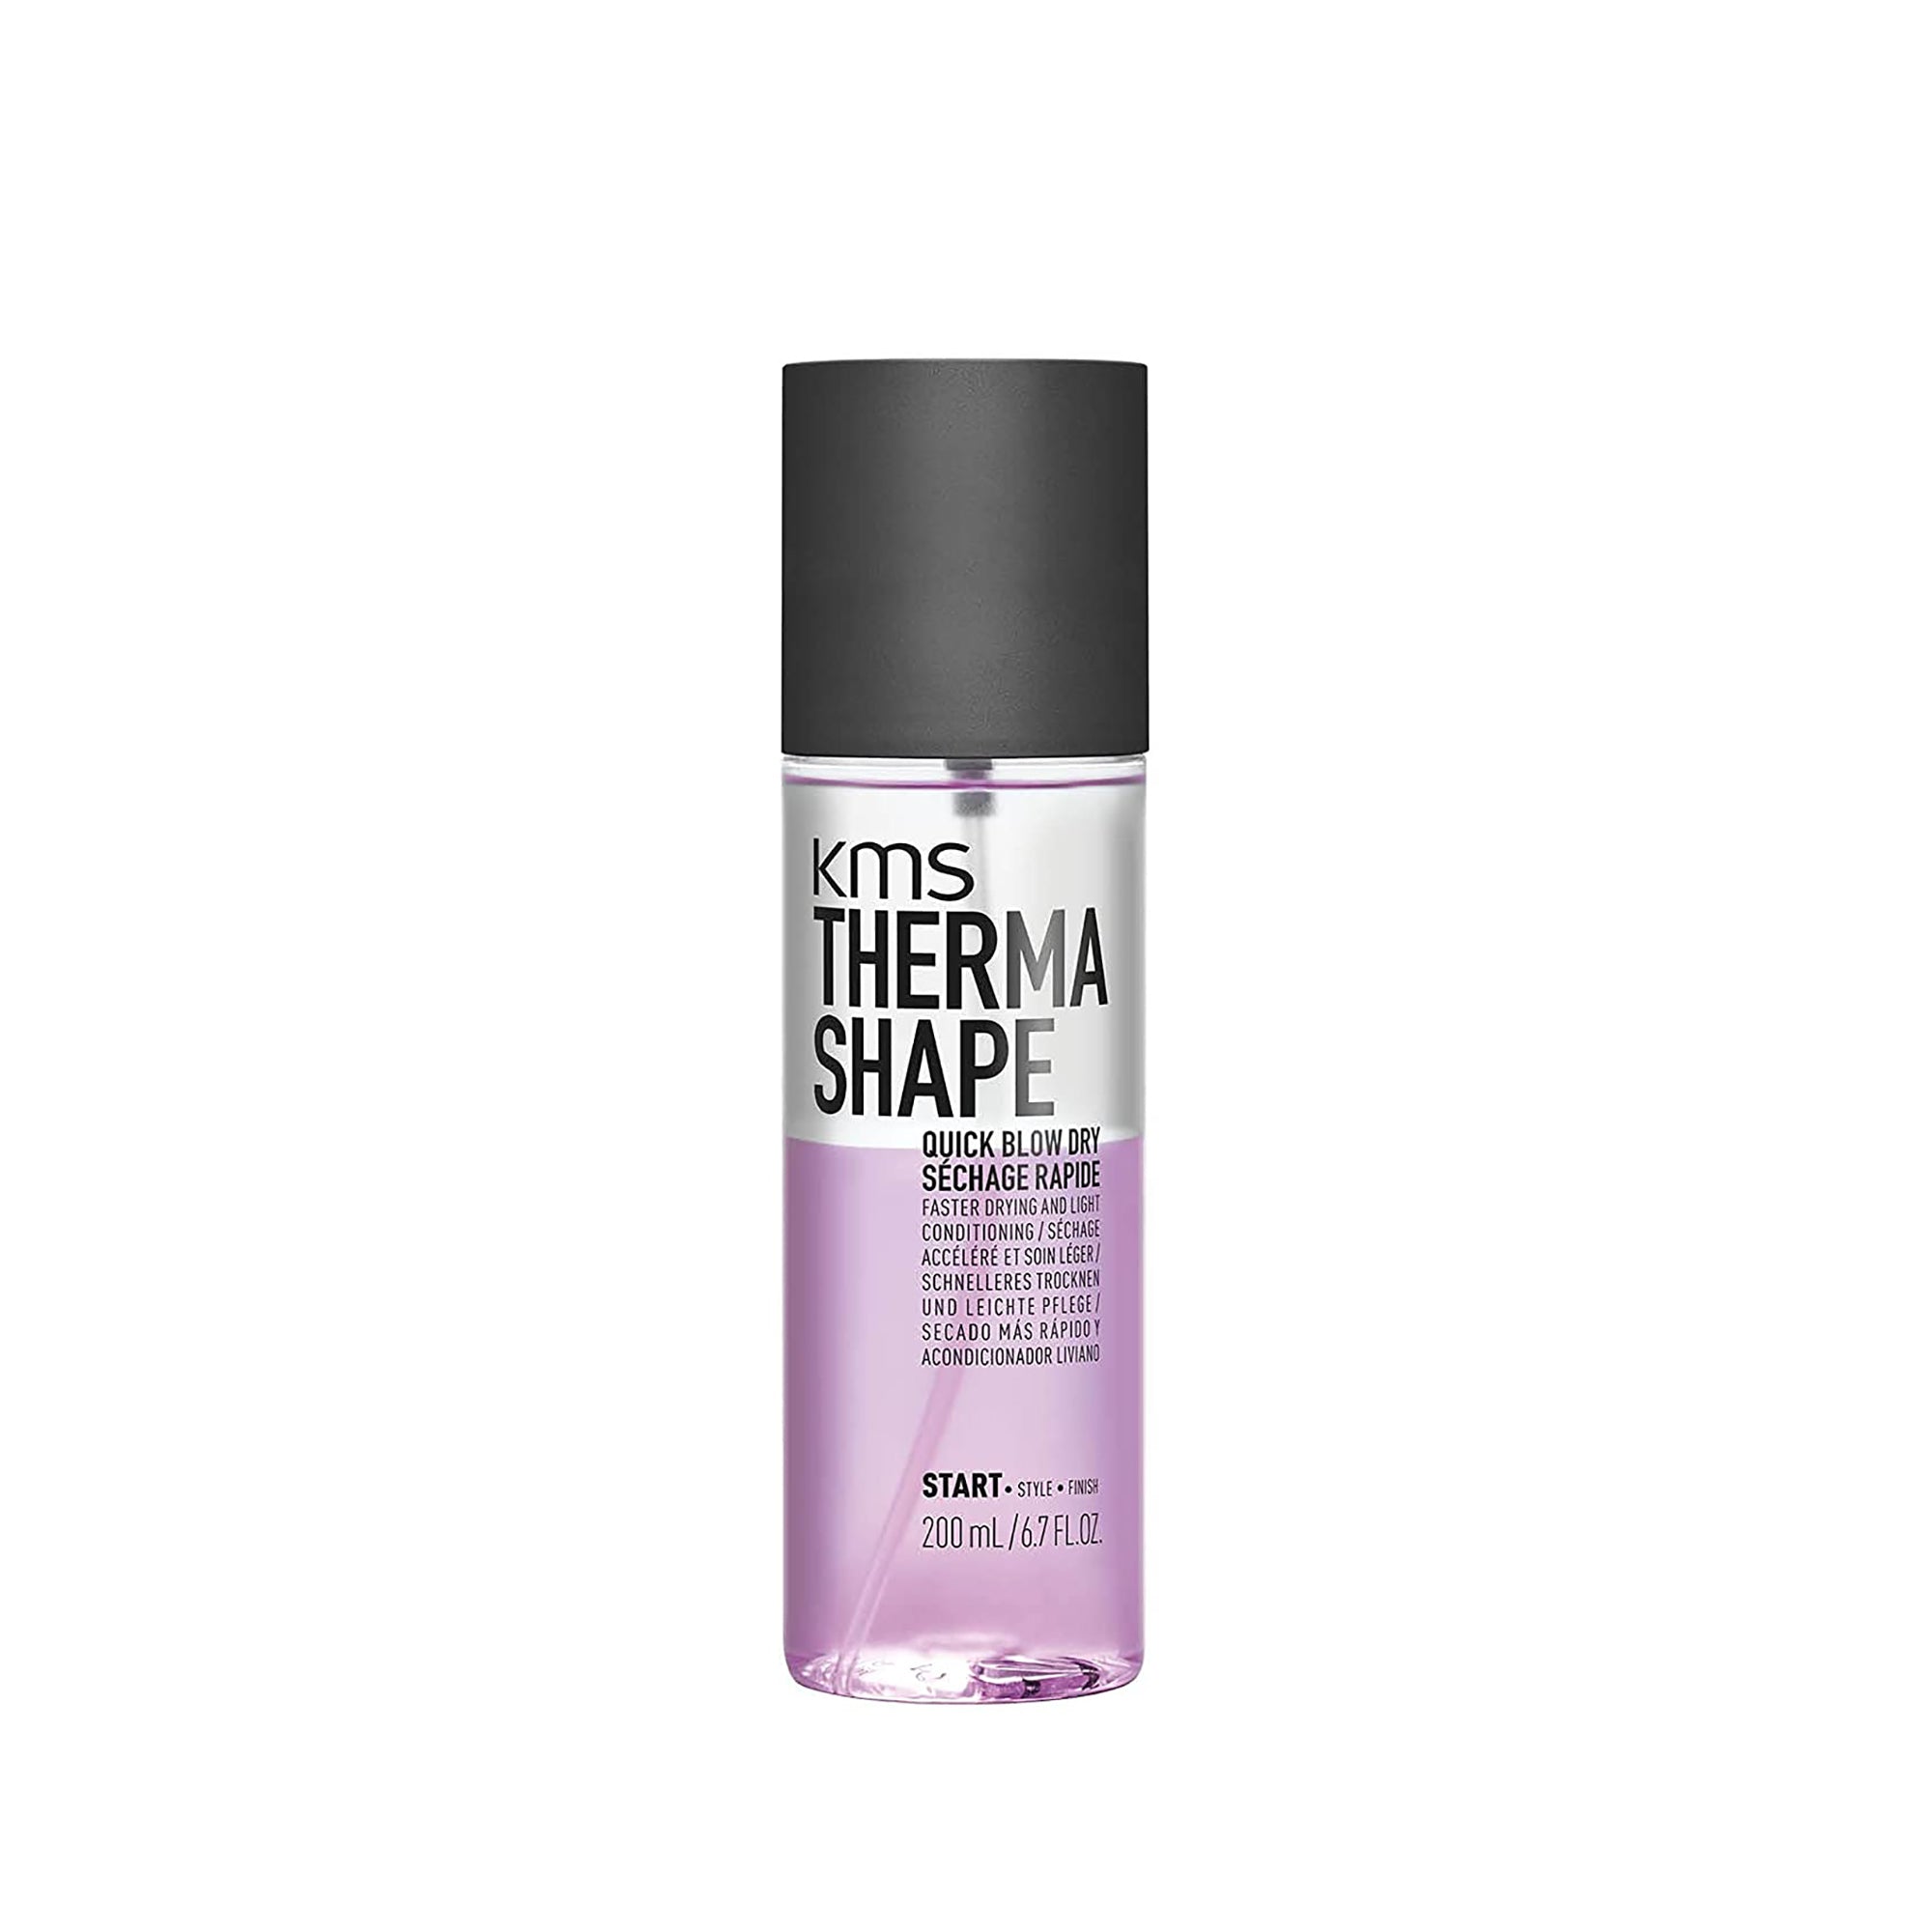 KMS Thermashape Quick Blow Dry / 6.7OZ